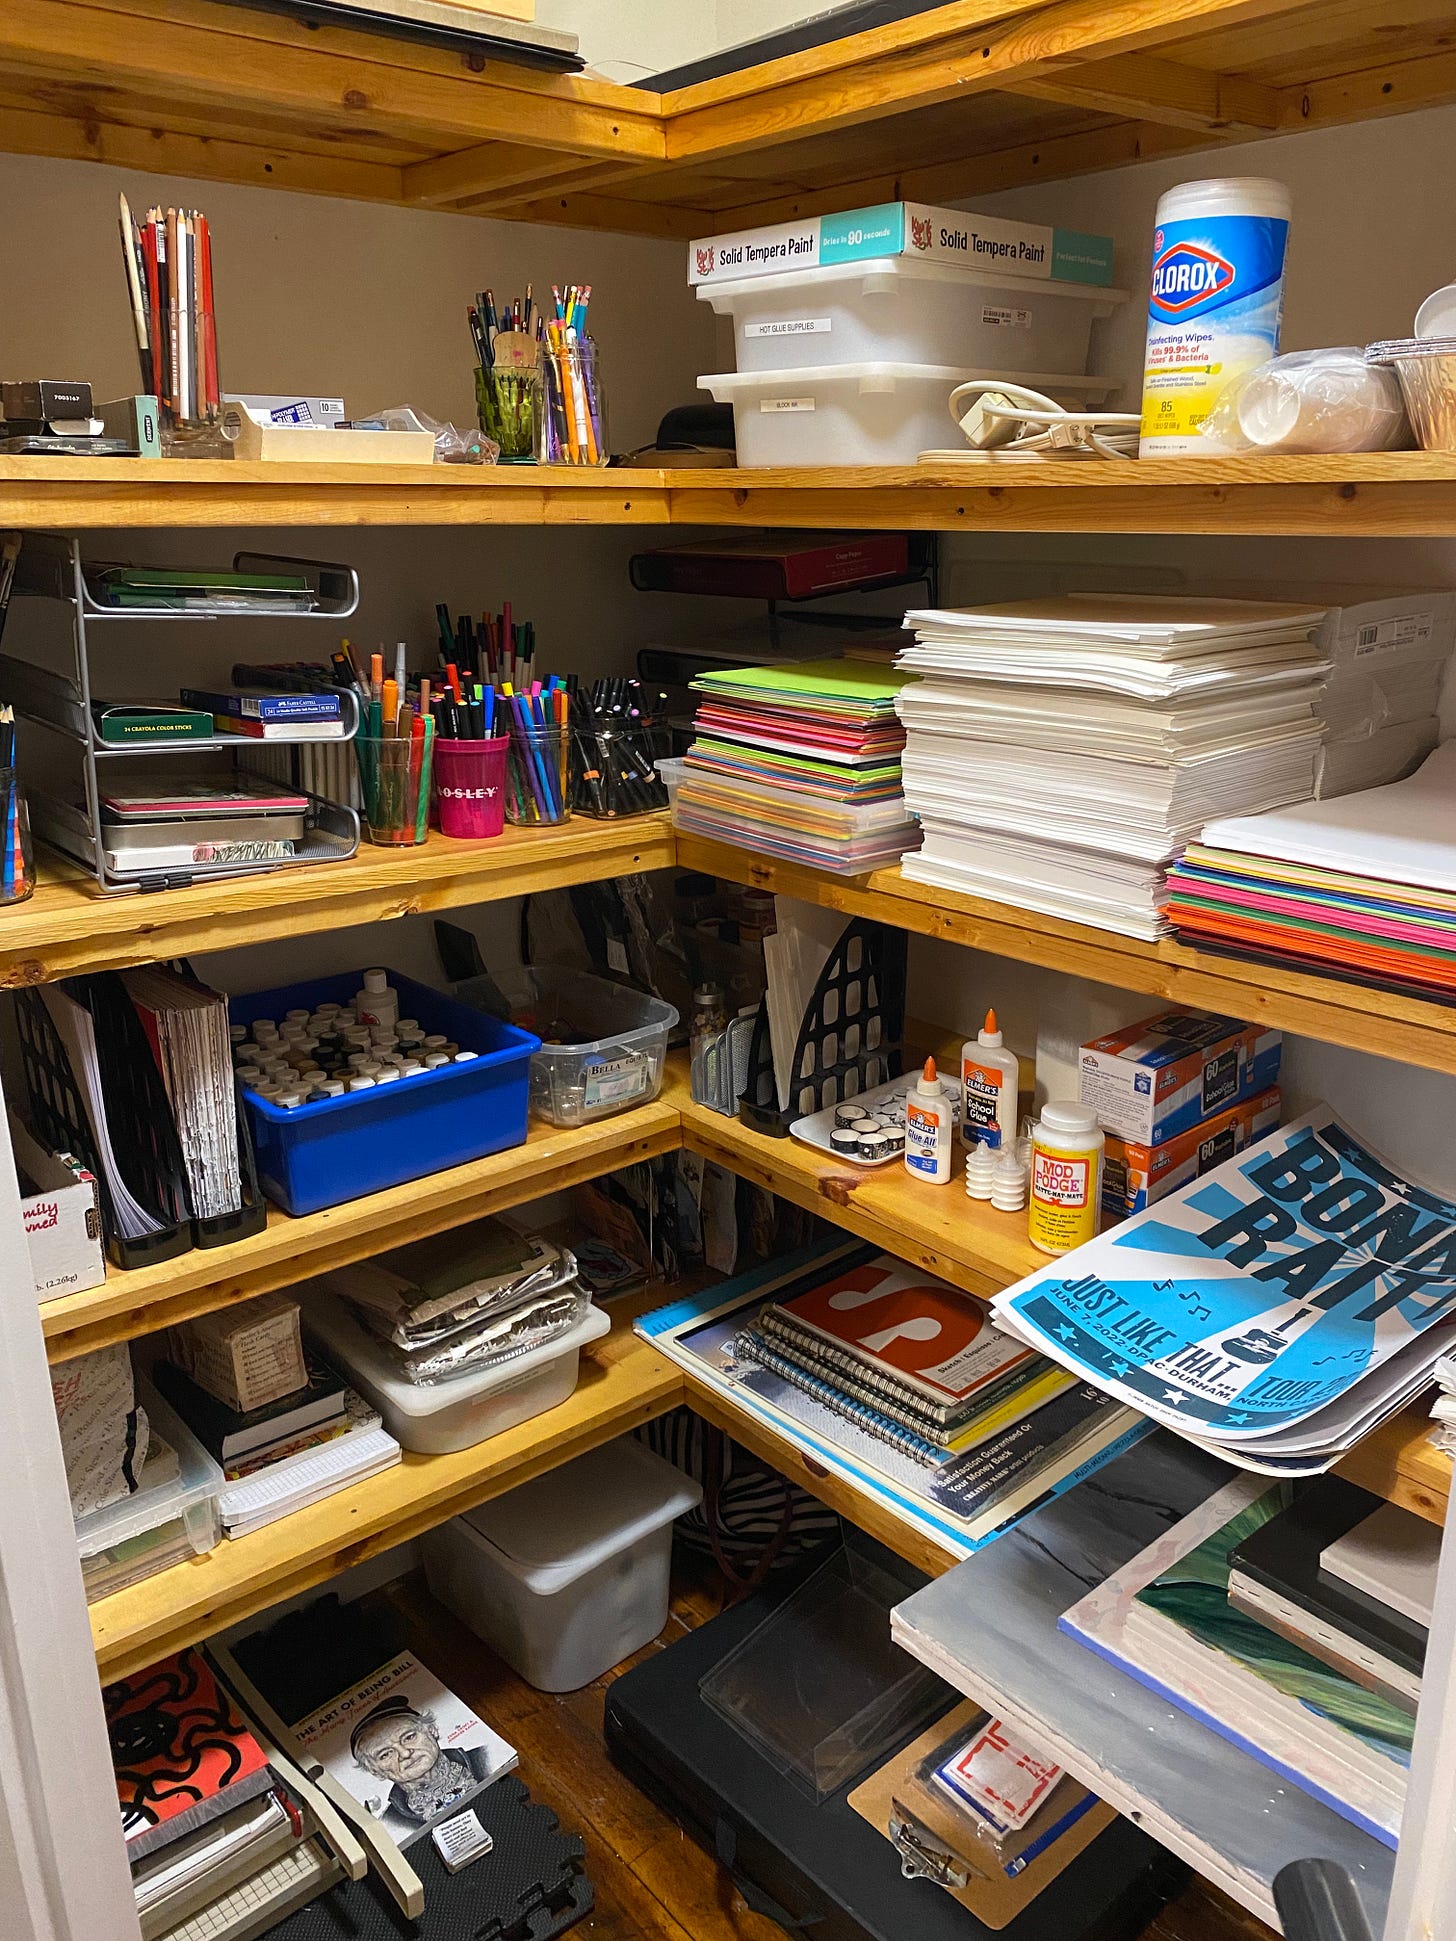 Full supply closet with tons of supplies.